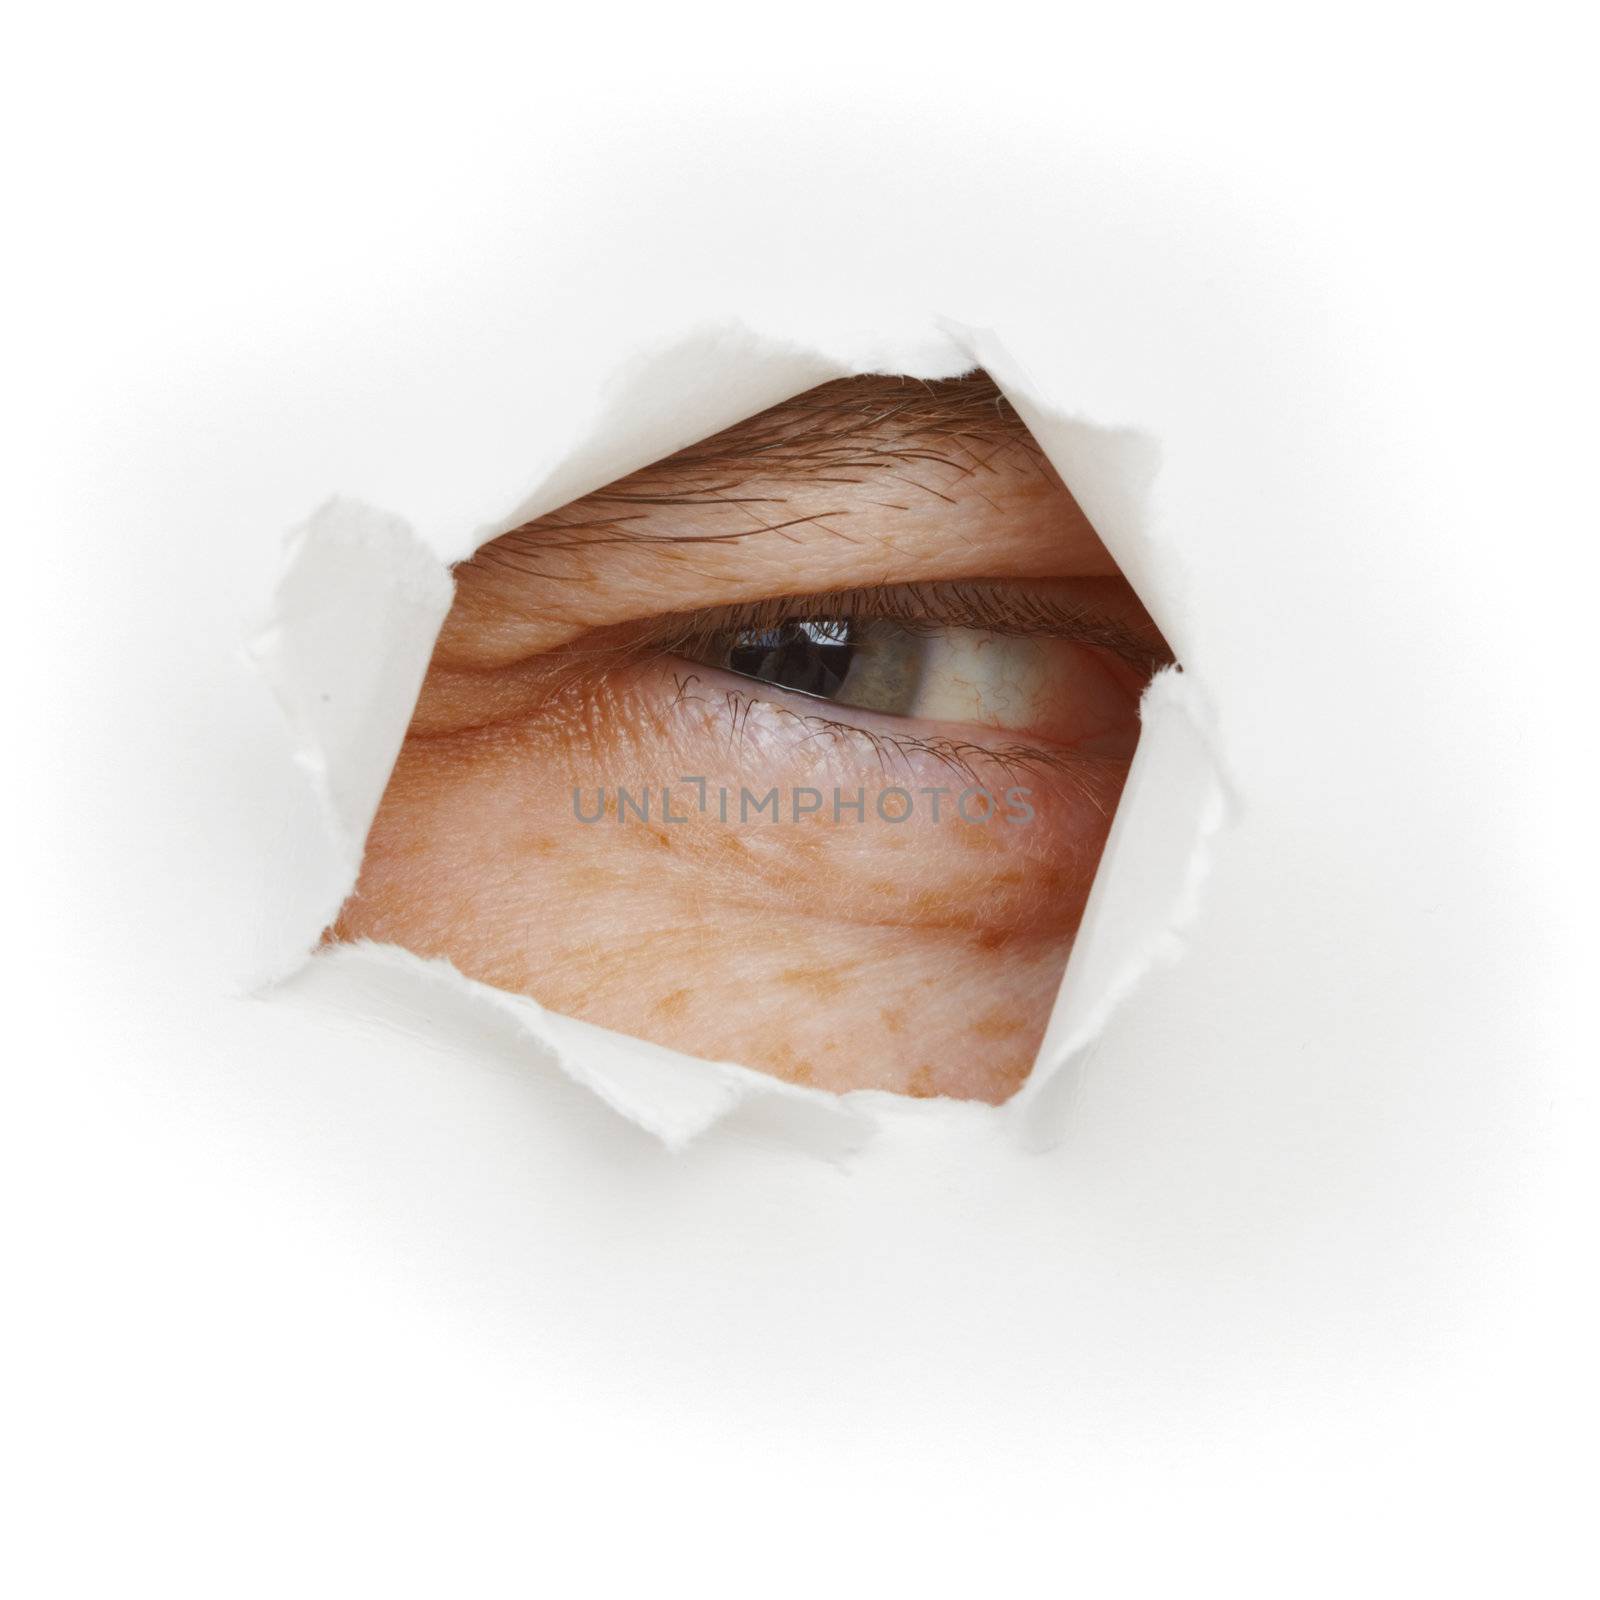 Squinting eye looks through a hole in white paper